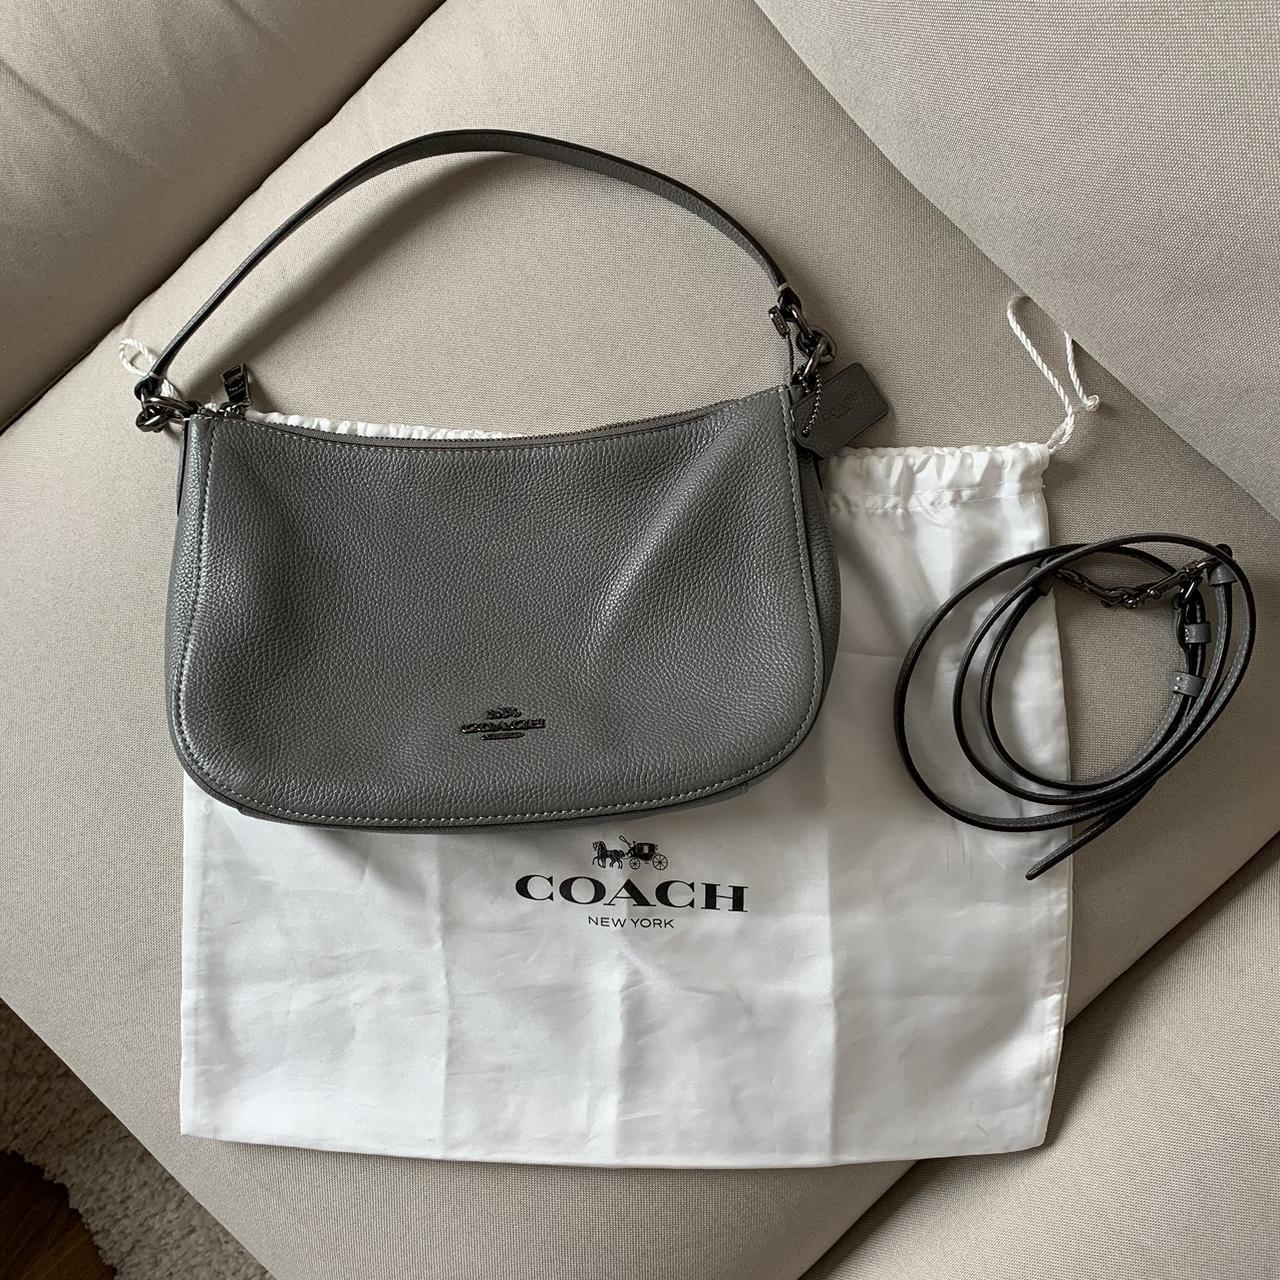 COACH Studio 19 Leather Shoulder Bag in Gray | Lyst